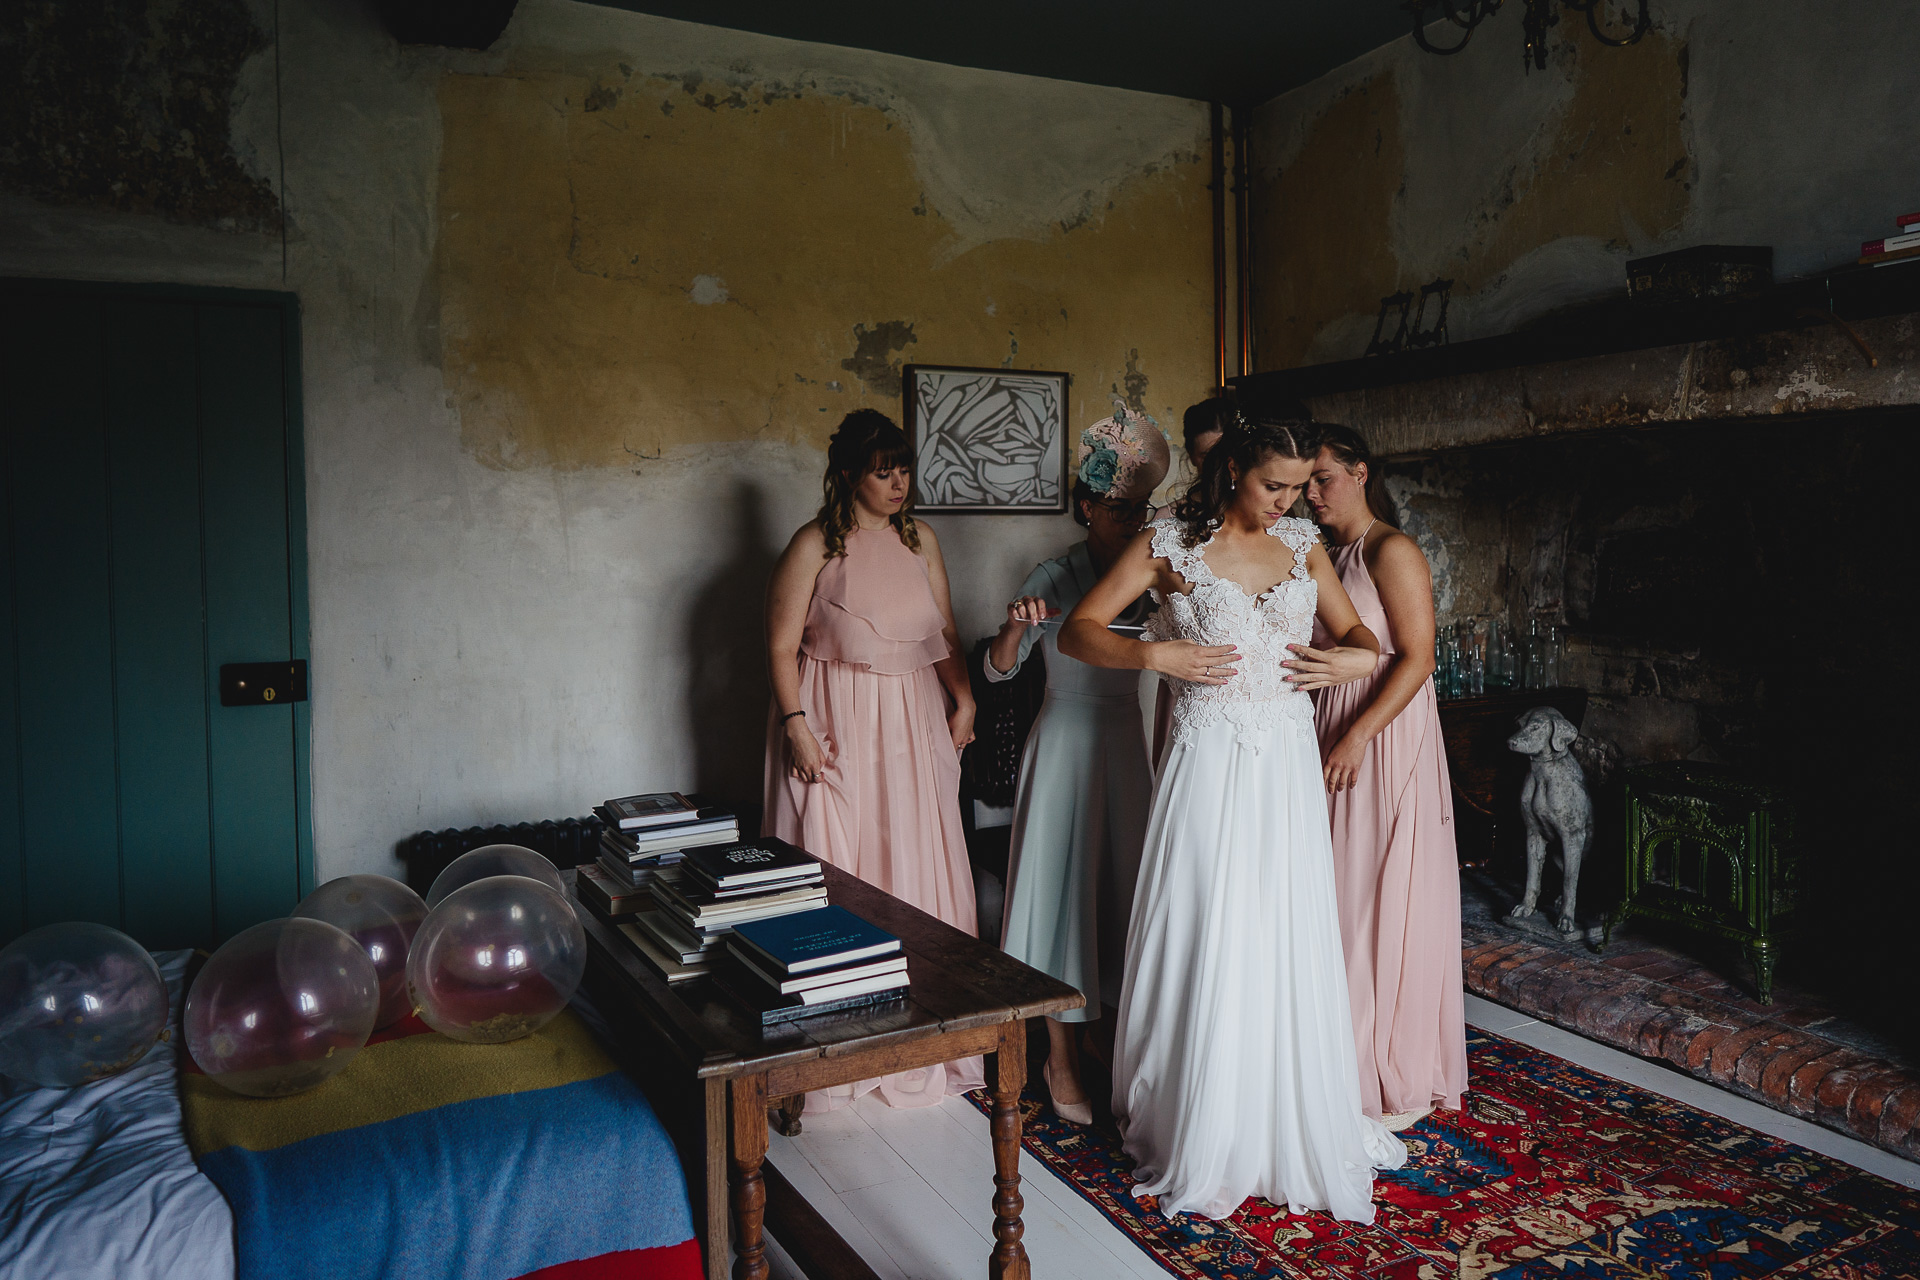 Bride with bridesmaids putting on a wedding dress